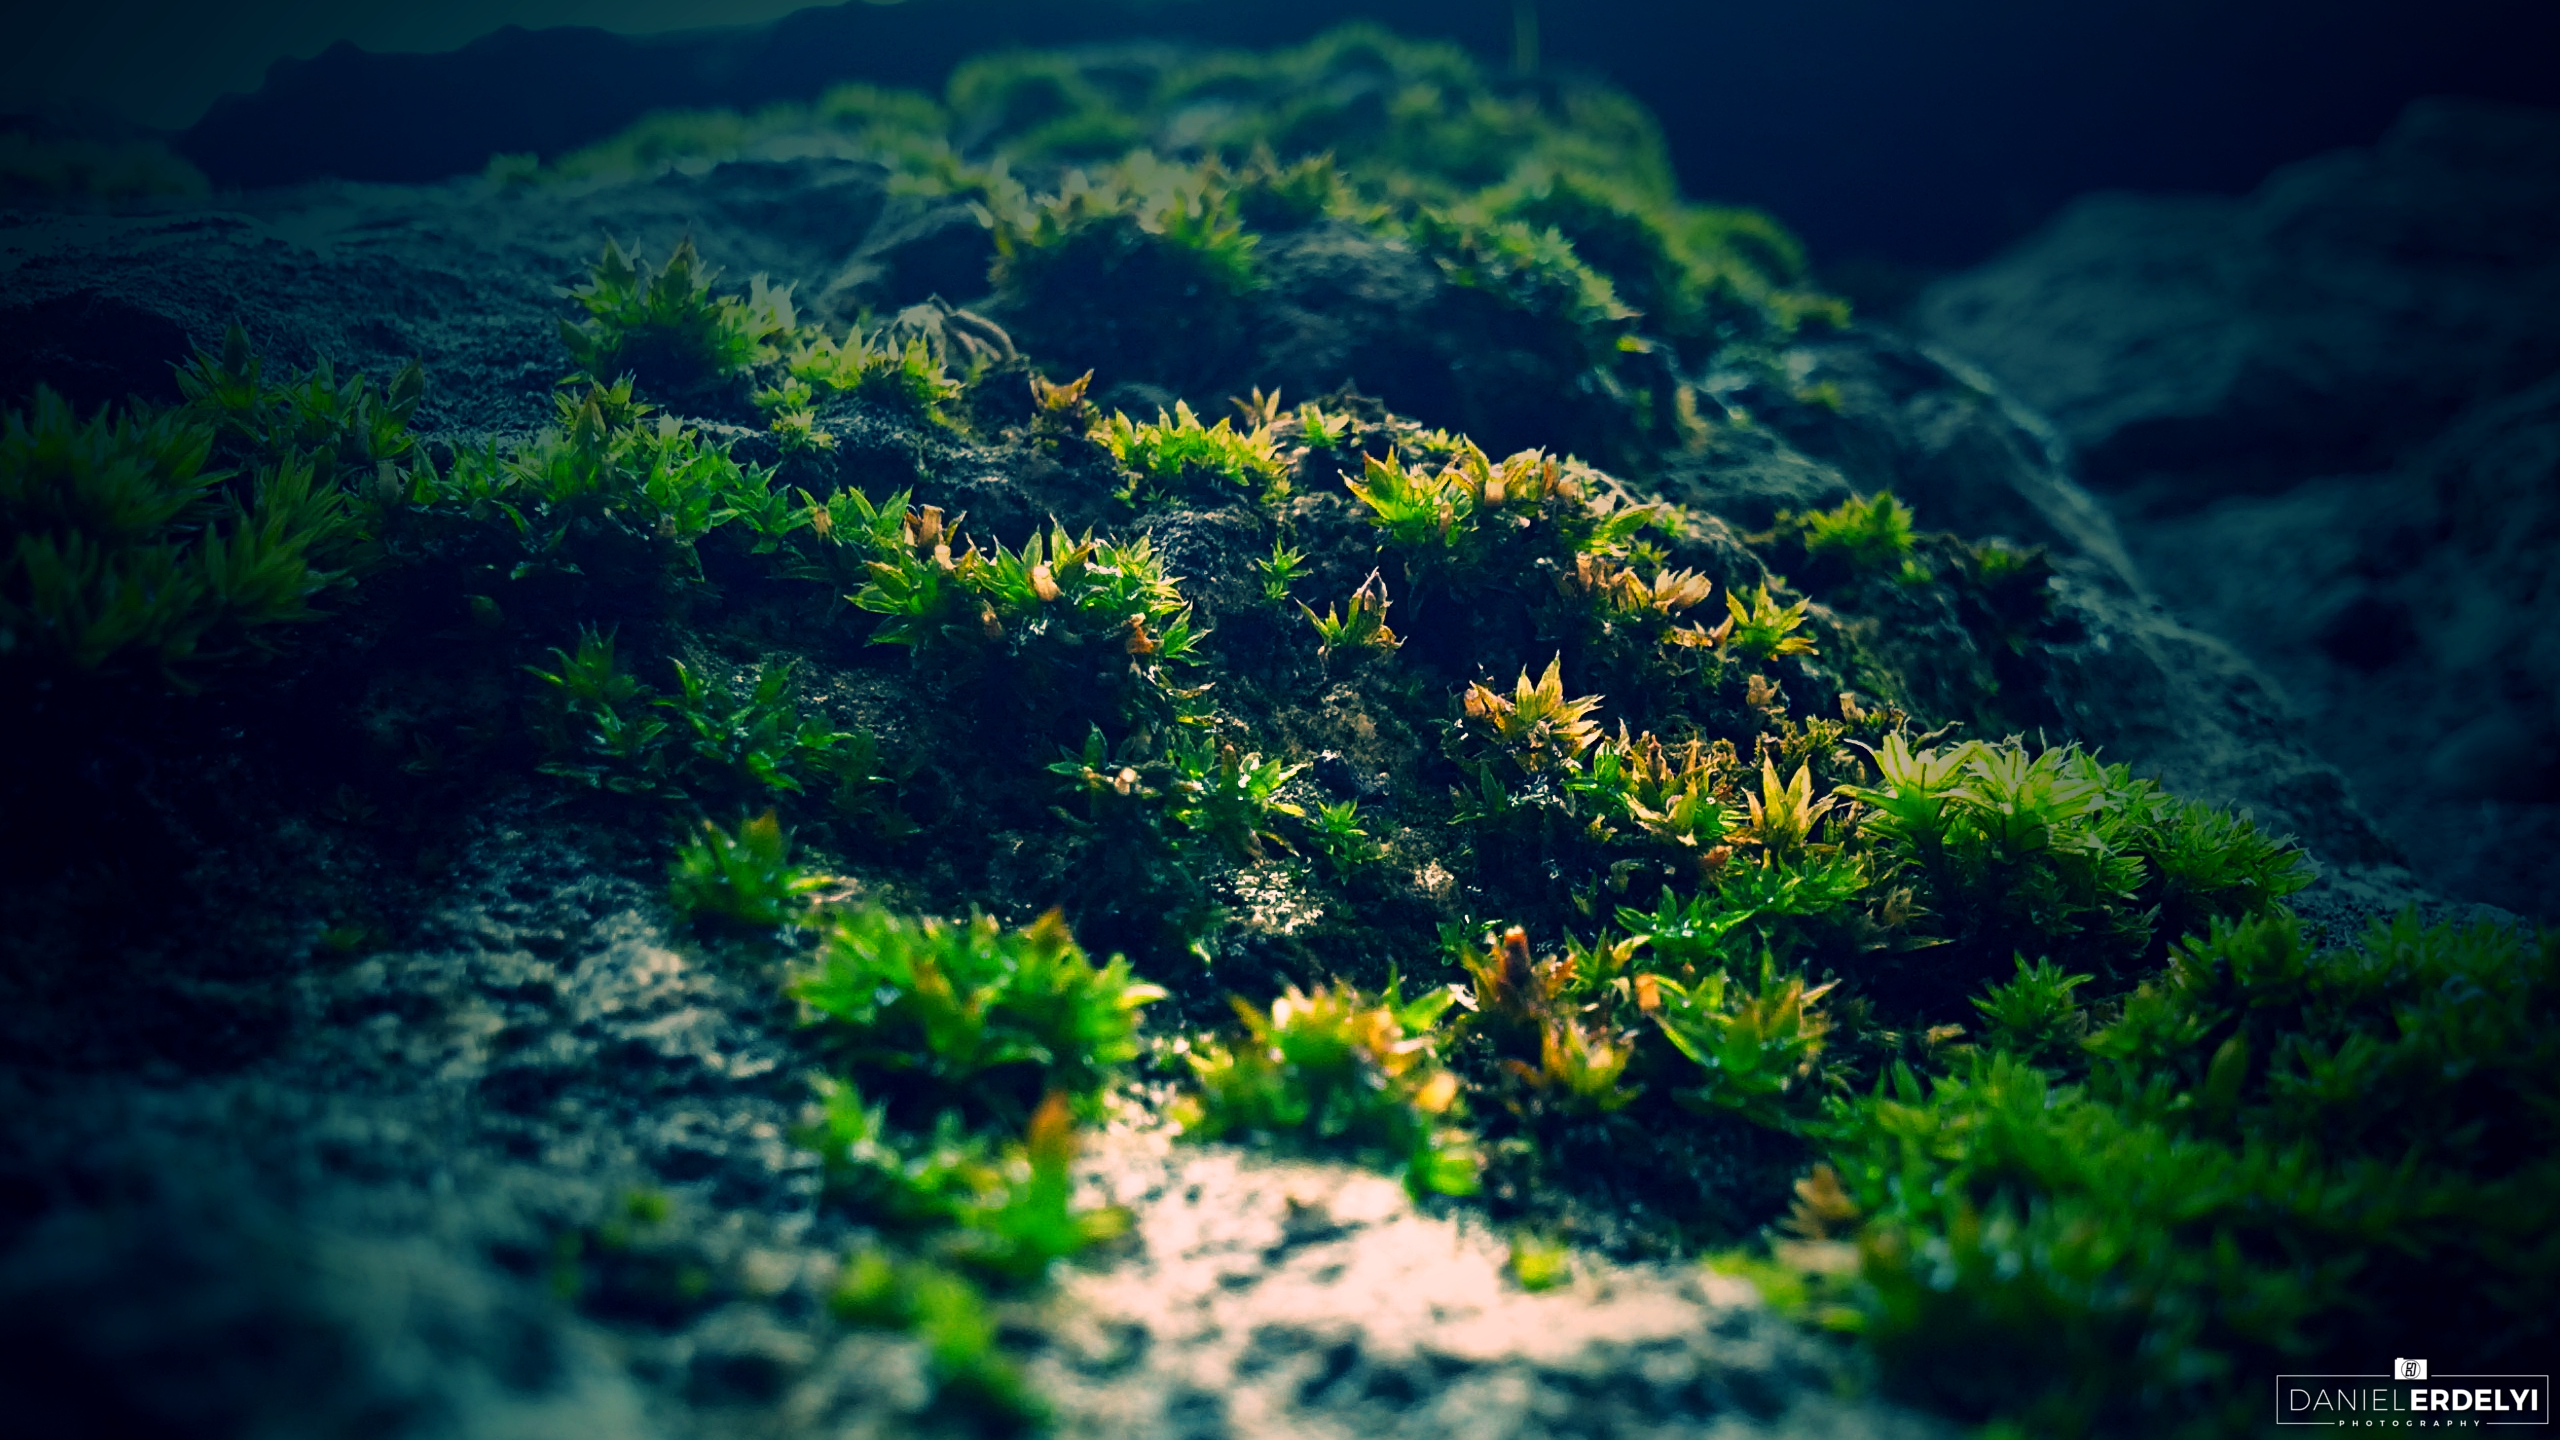 General 2560x1440 moss macro photography green plants nature watermarked